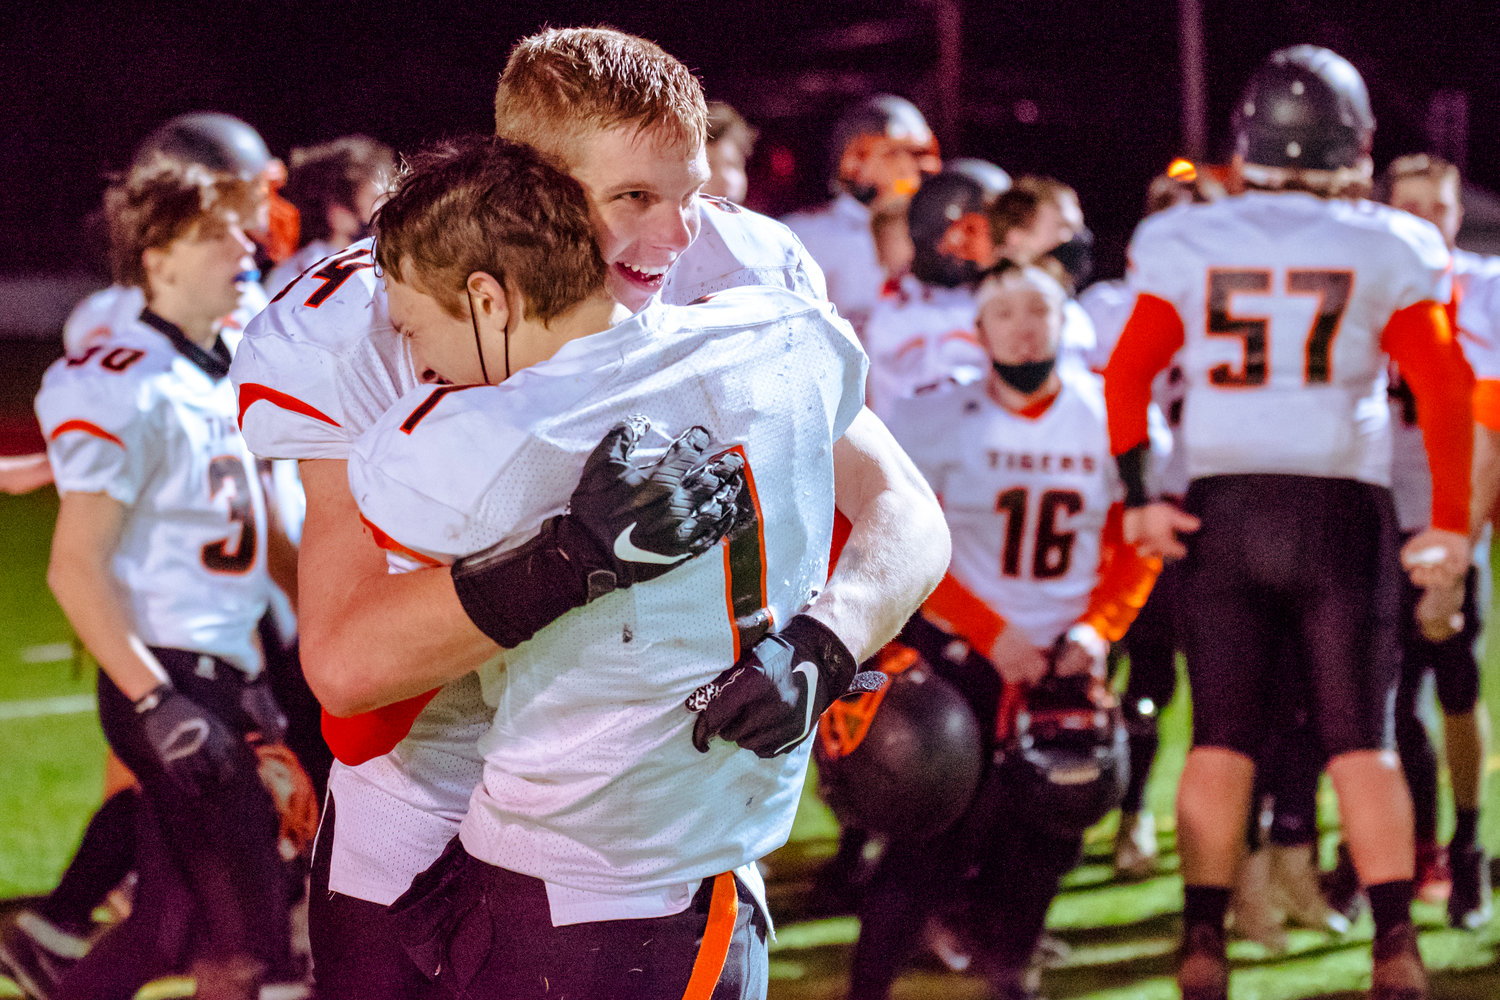 Napavine's Cade Evander (34) and Laythan Demarest (1) smile and embrace following a game against Onalaska Saturday night at Tiger Stadium.